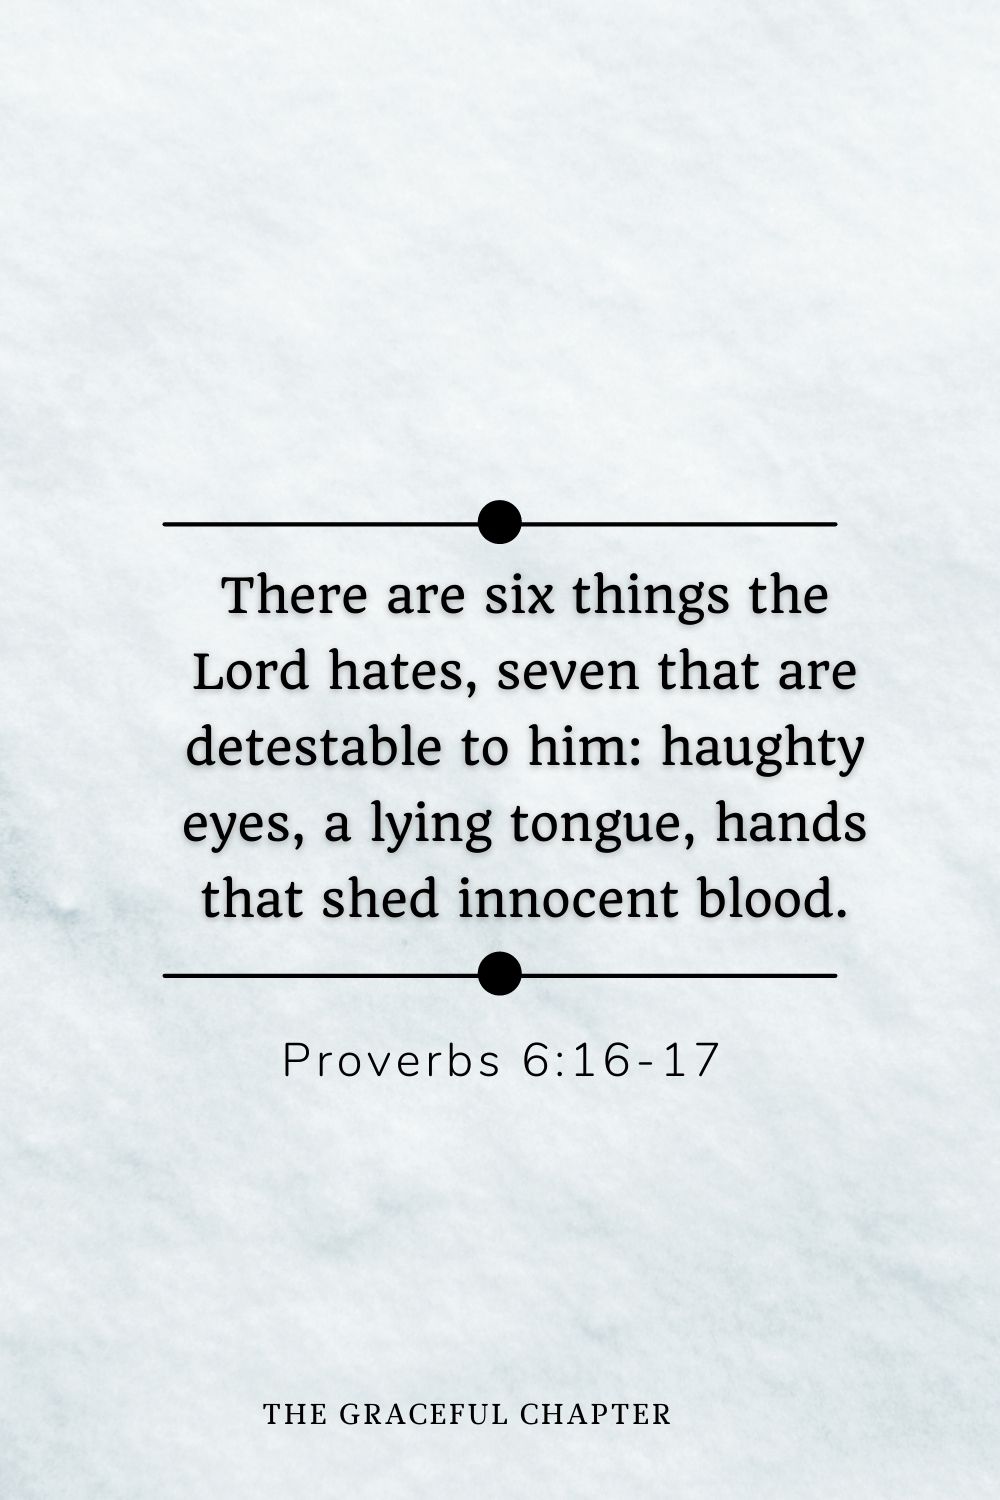 There are six things the Lord hates, seven that are detestable to him: haughty eyes, a lying tongue, hands that shed innocent blood. Proverbs 6:16-17